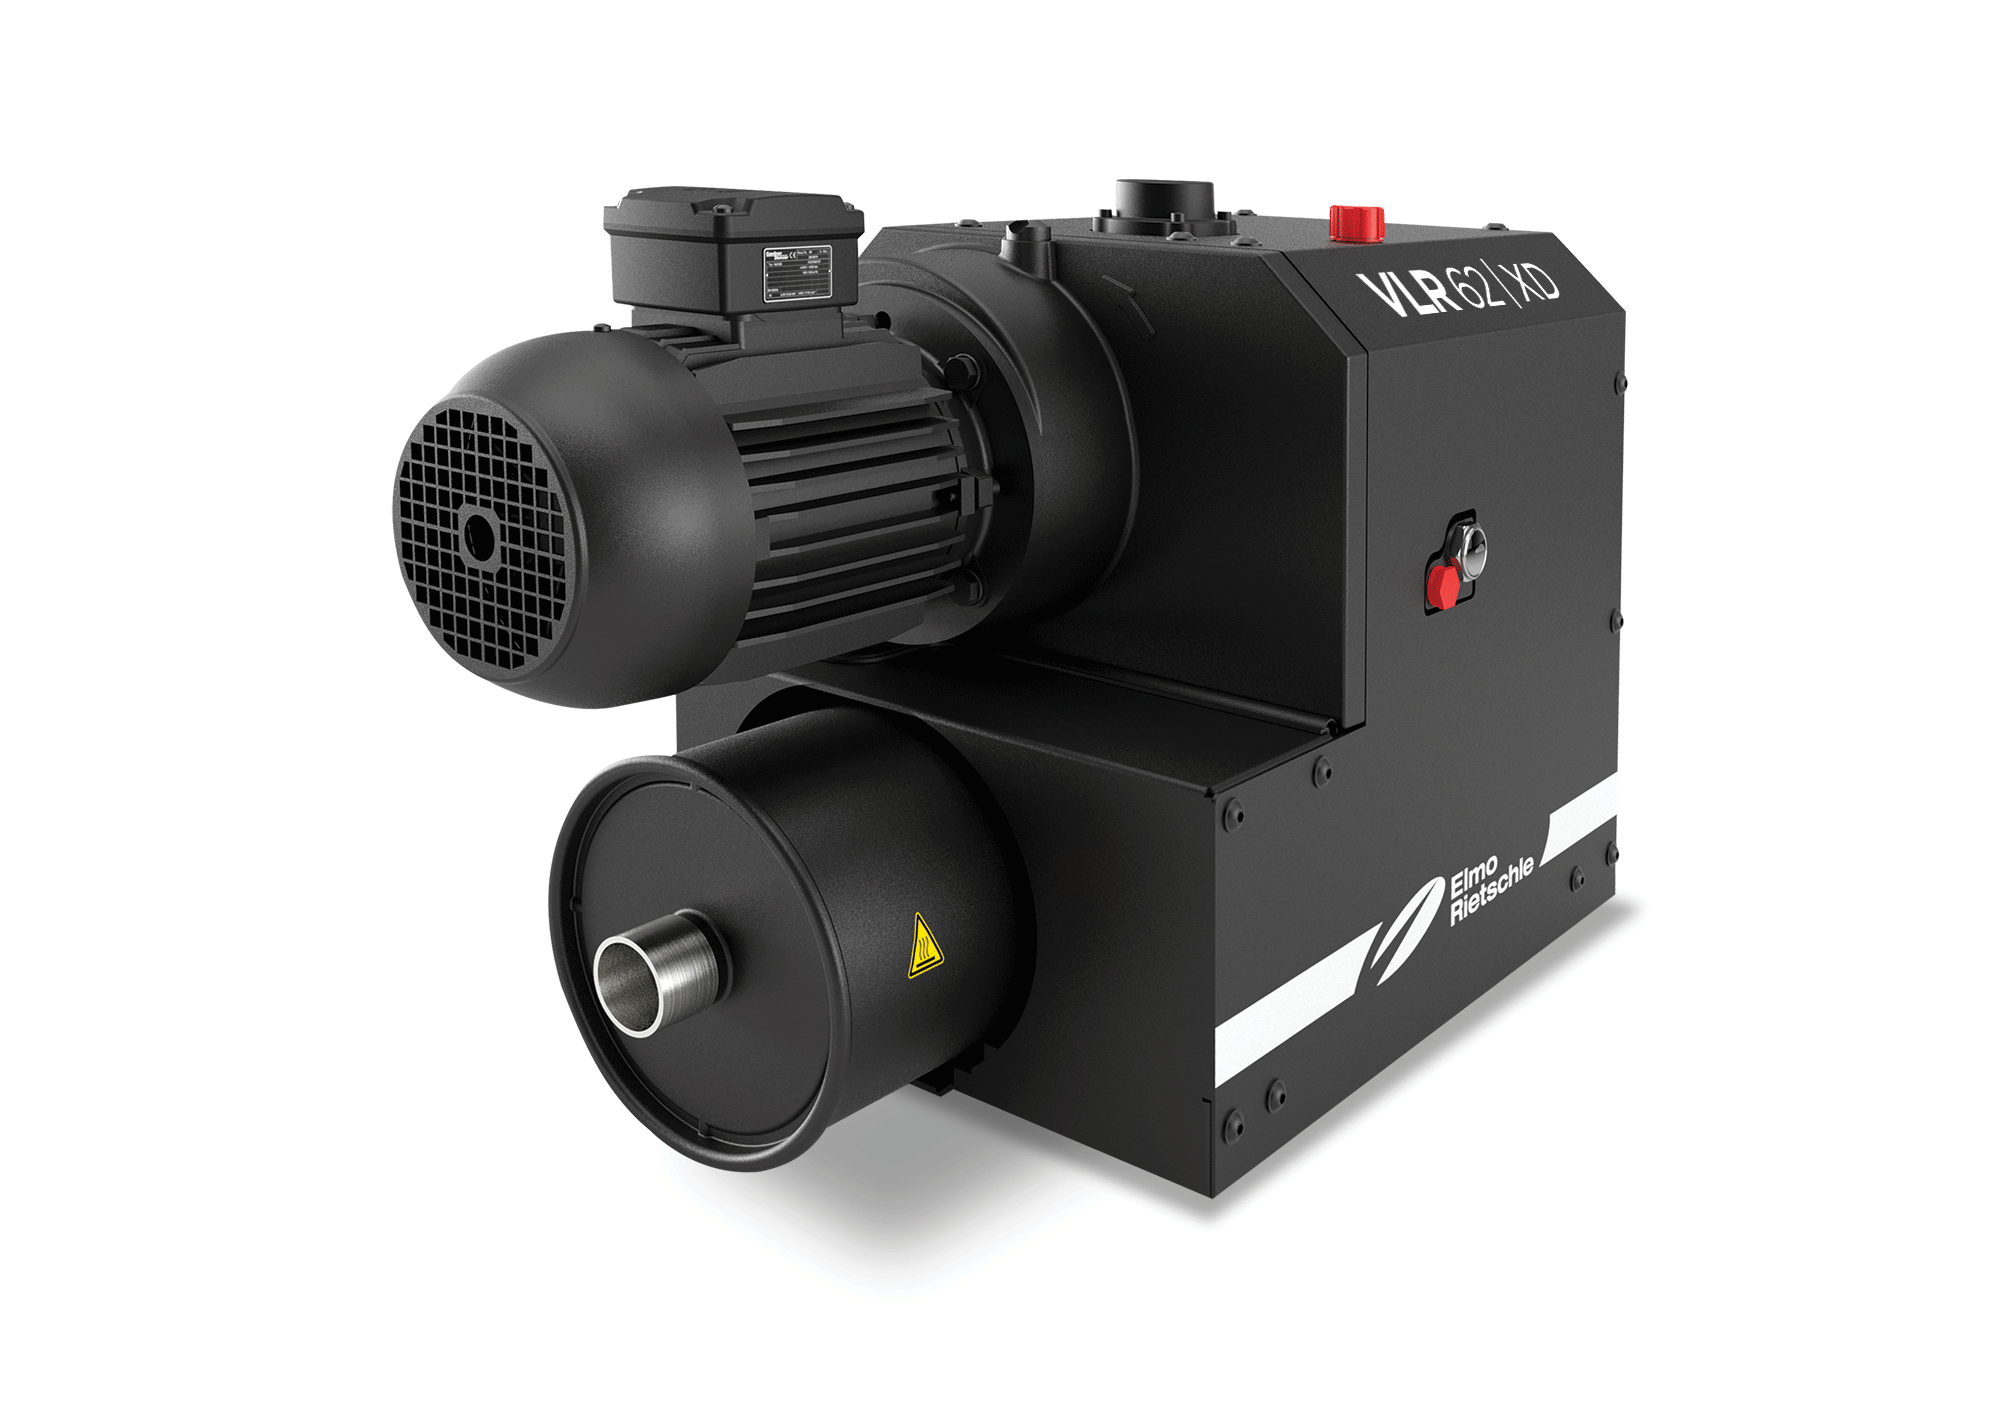 Gardner Denver's new oil-free, claw technology vacuum pump, the C-VLR 62, will be launched at this year's IFFA.